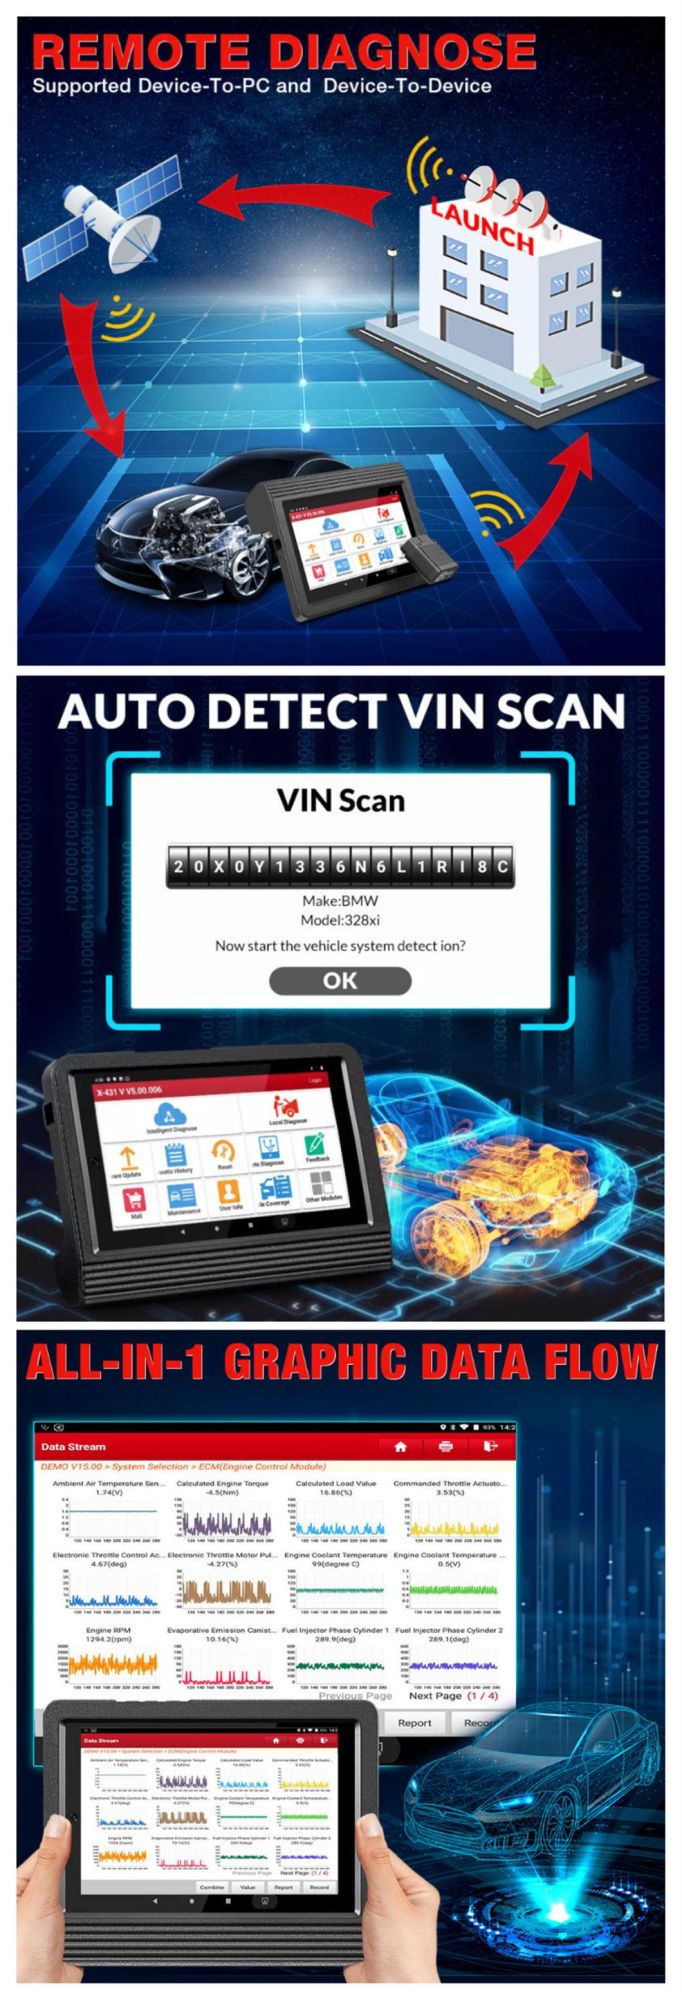 OBD II Scanner Launch X431 Software Original 2 Year Free Update for All Software of The Cars